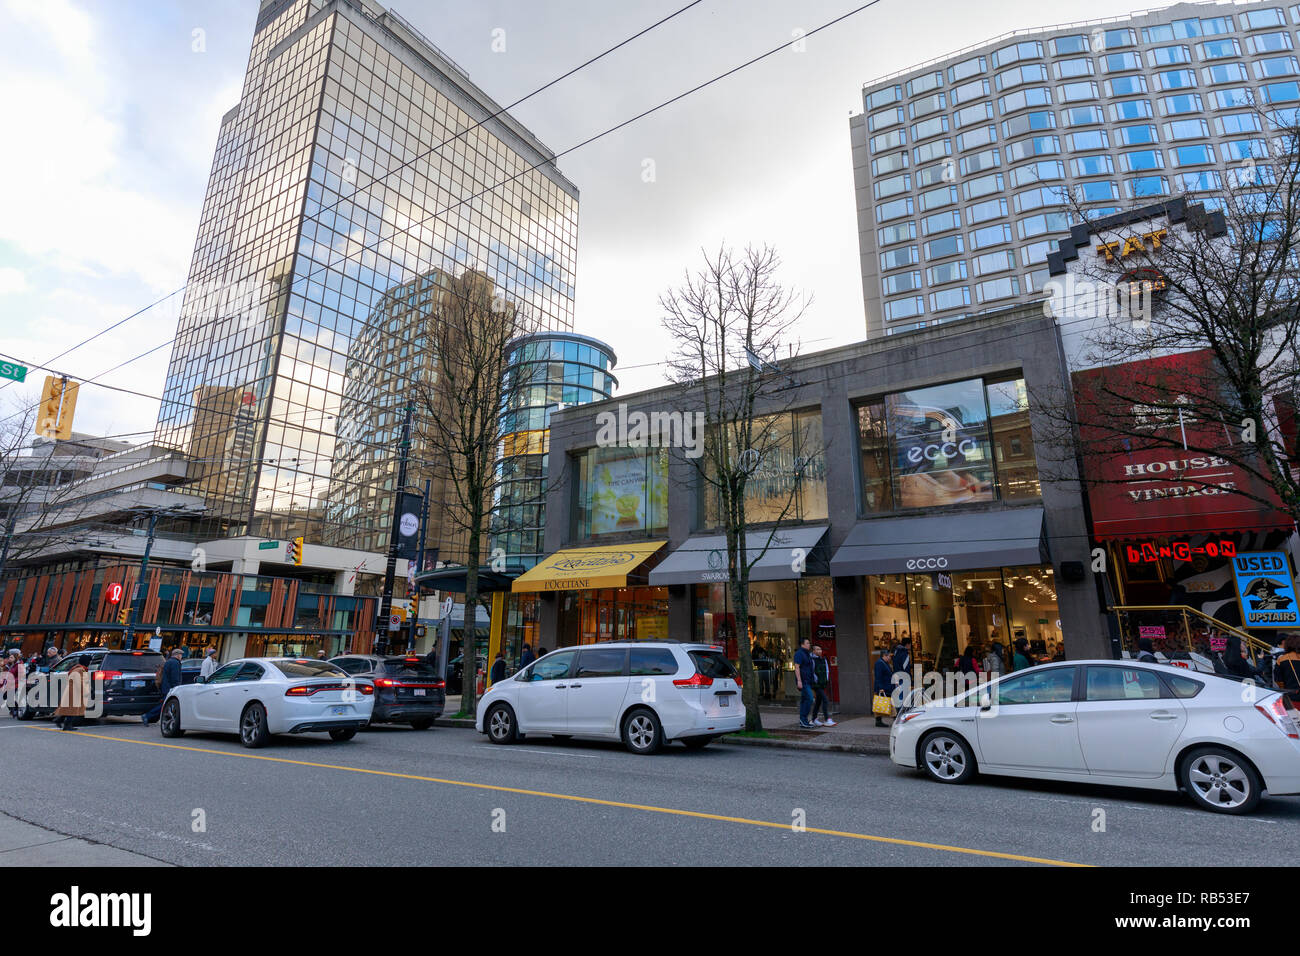 https://c8.alamy.com/comp/RB53E7/vancouver-canada-feb-1-2019-robson-street-of-downtown-shopping-district-in-vancouver-bc-RB53E7.jpg